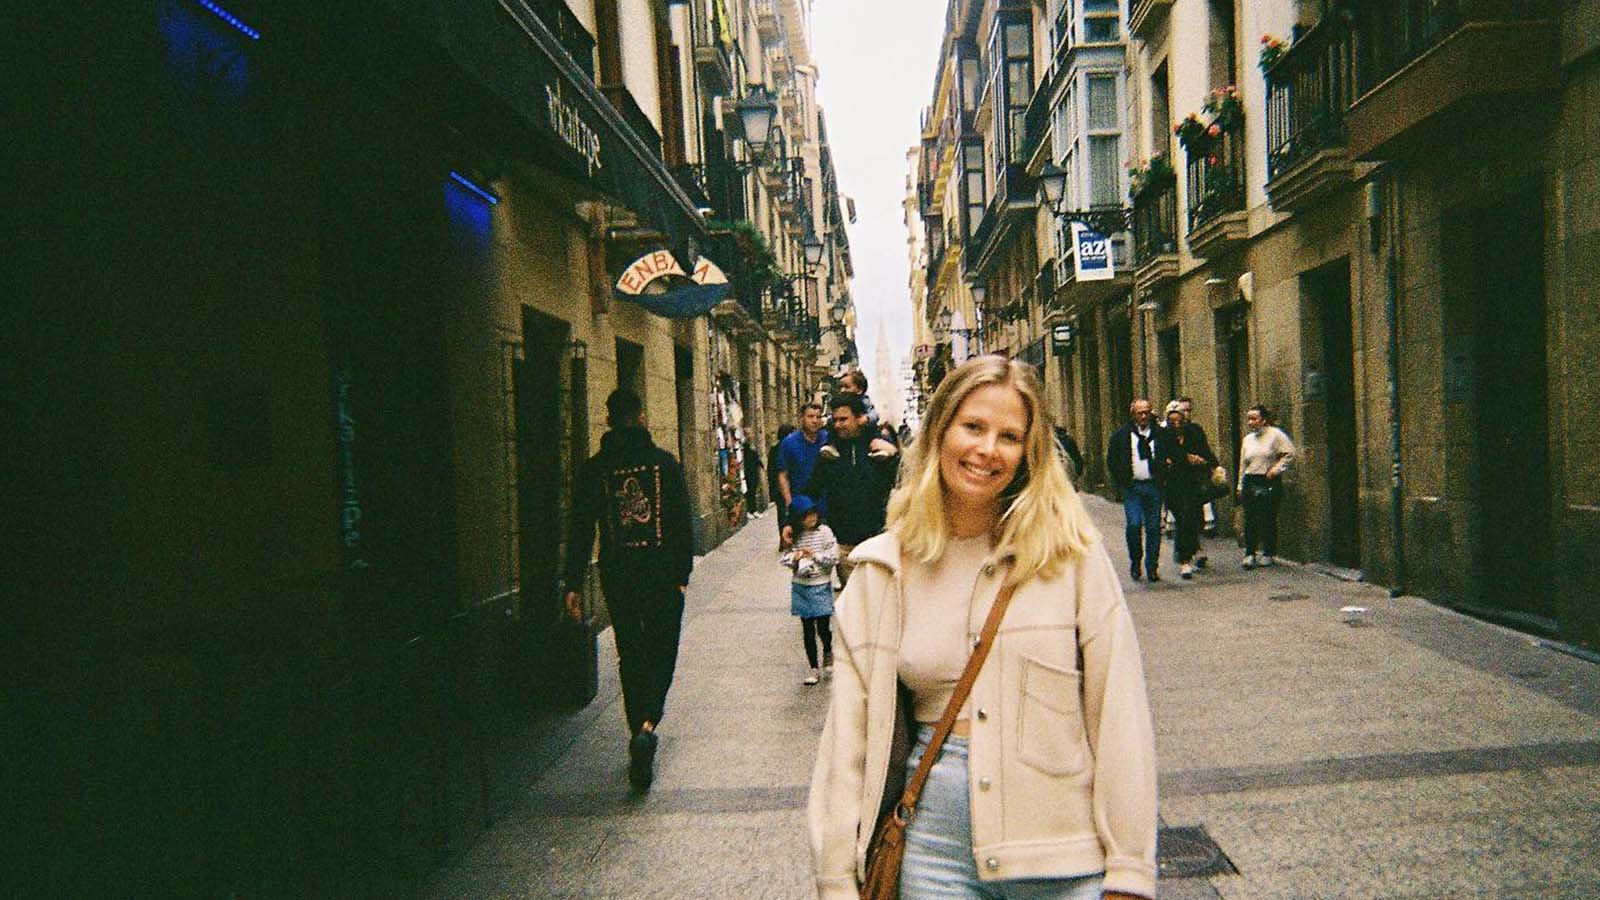 Student smiling in a cobblestone street in Spain